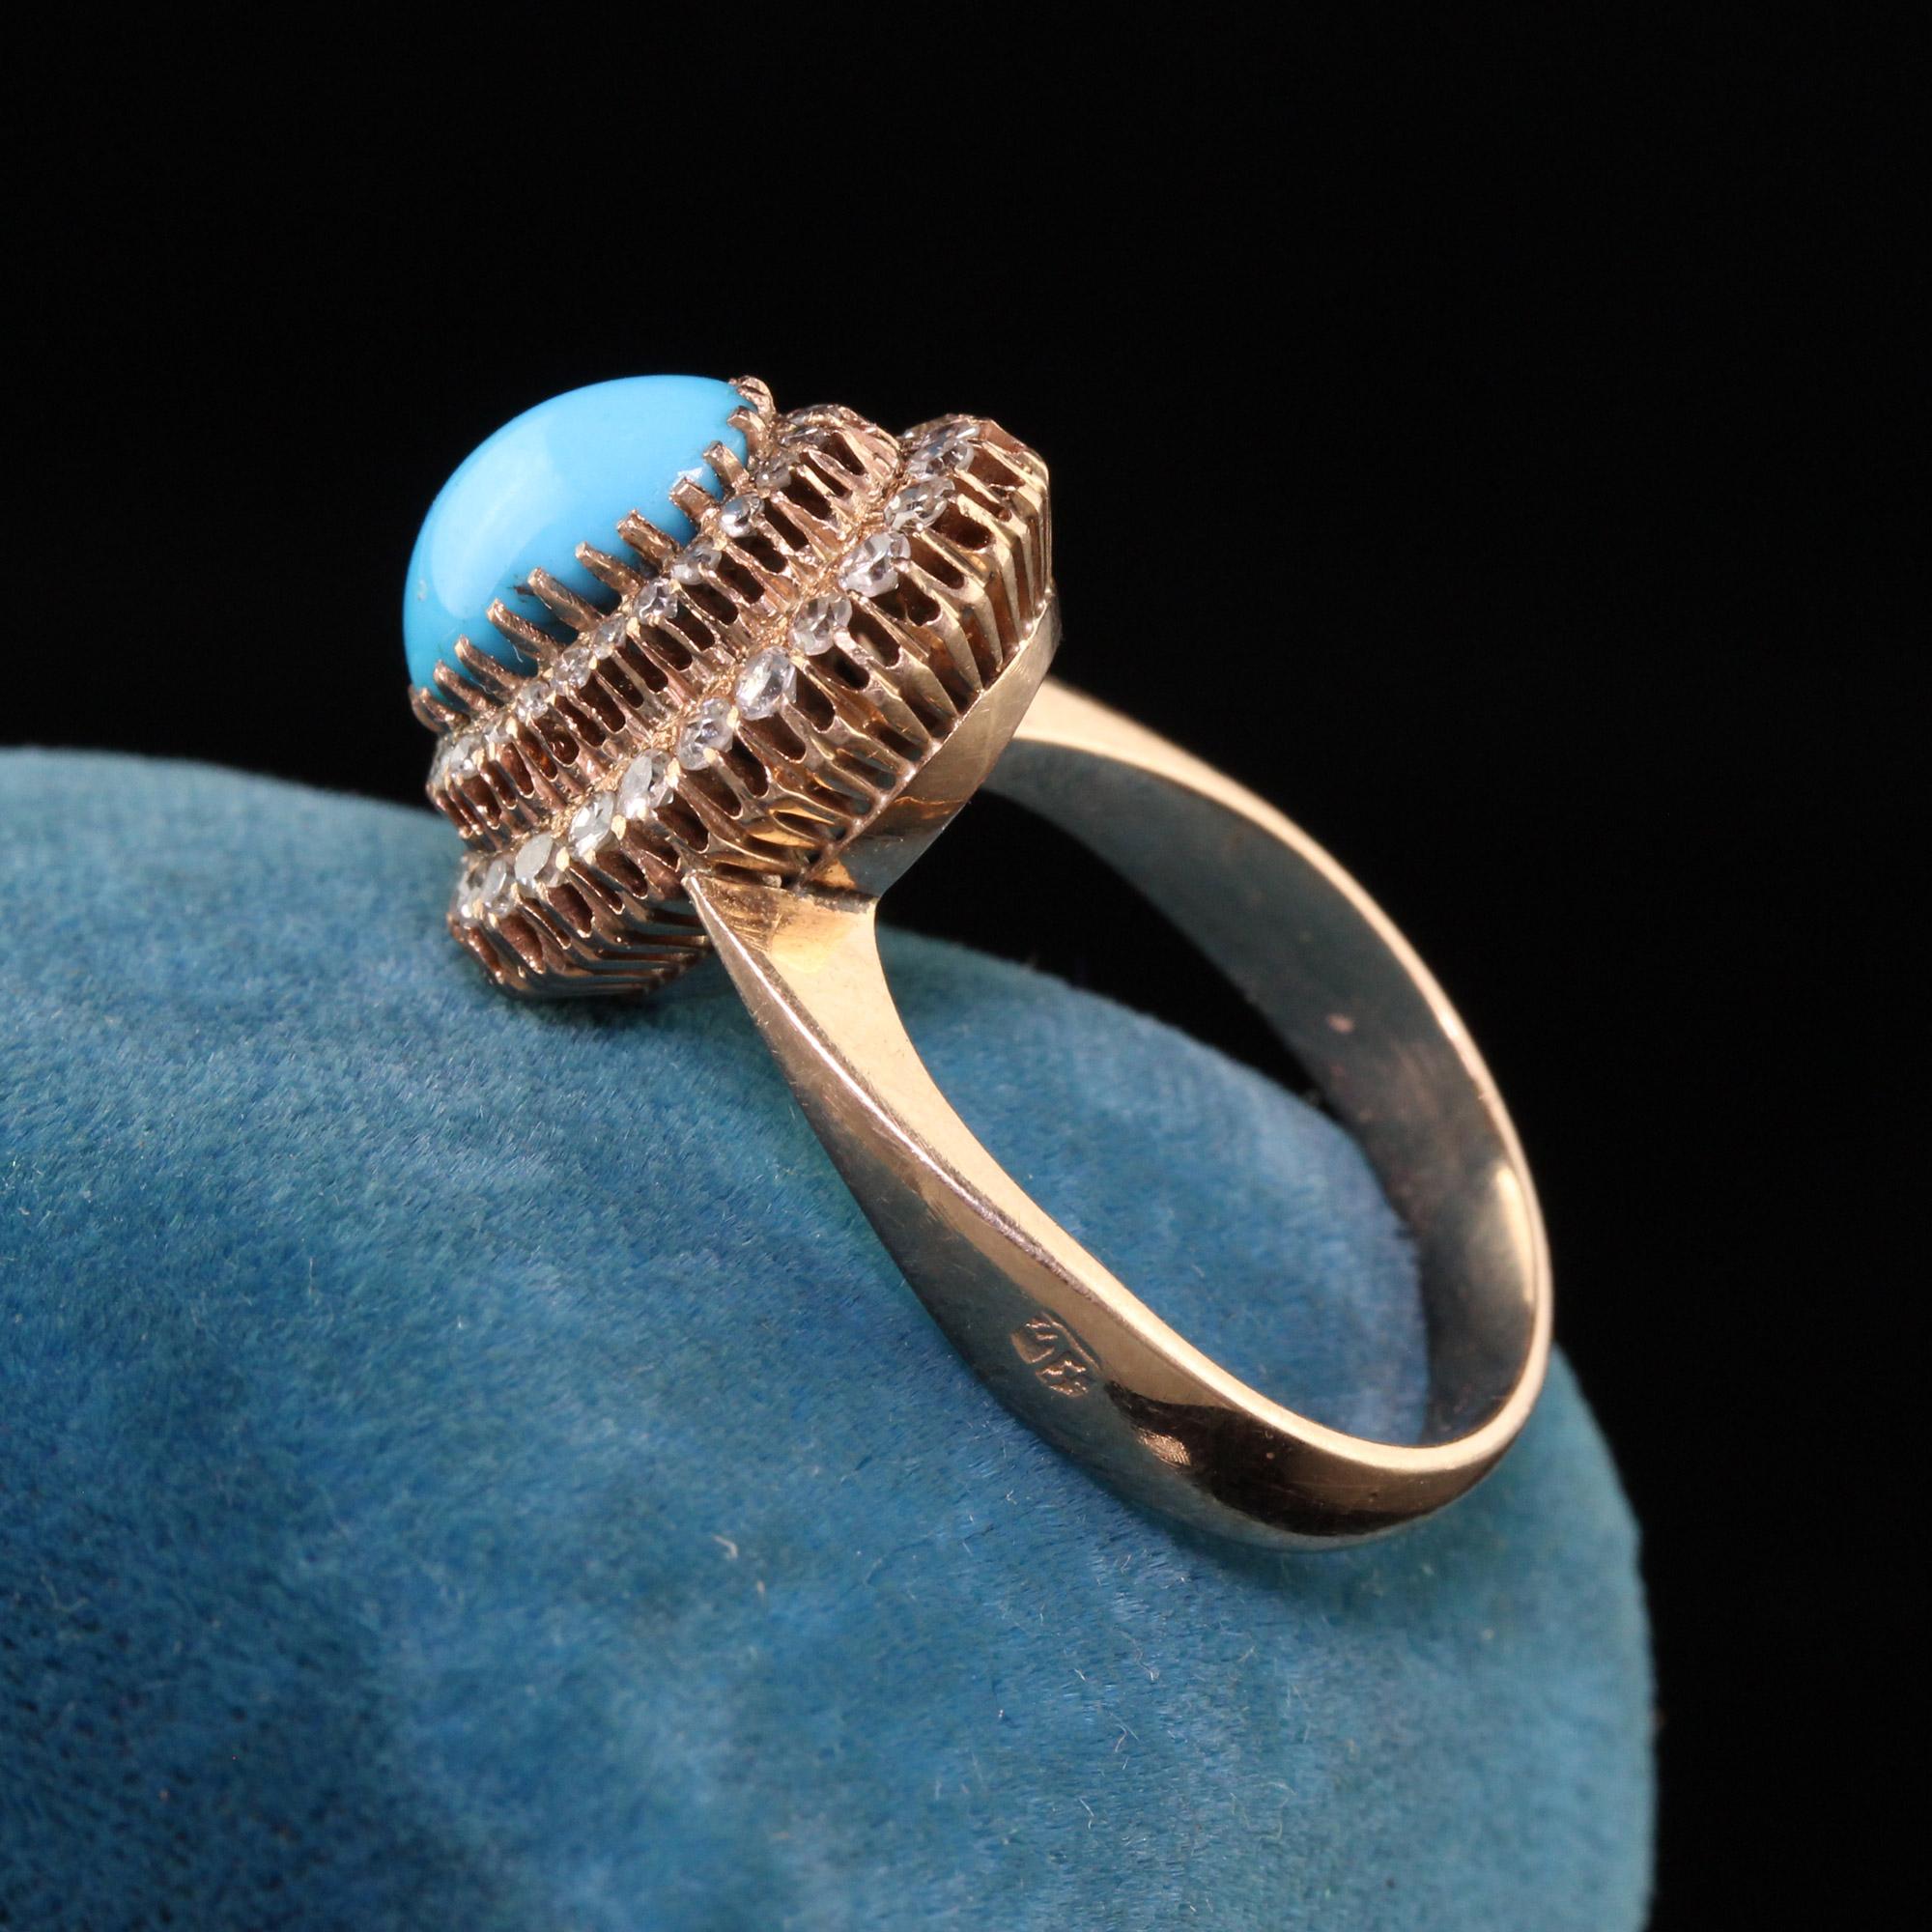 Beautiful Antique Art Deco 14K Rose Gold Turquoise and Diamond Cocktail Ring. This ring has a cabochon turquoise in the center of two rows of single cut diamonds.

Item #R0870

Metal: 14K Rose Gold

Diamonds: Approximately .40 cts

Color: